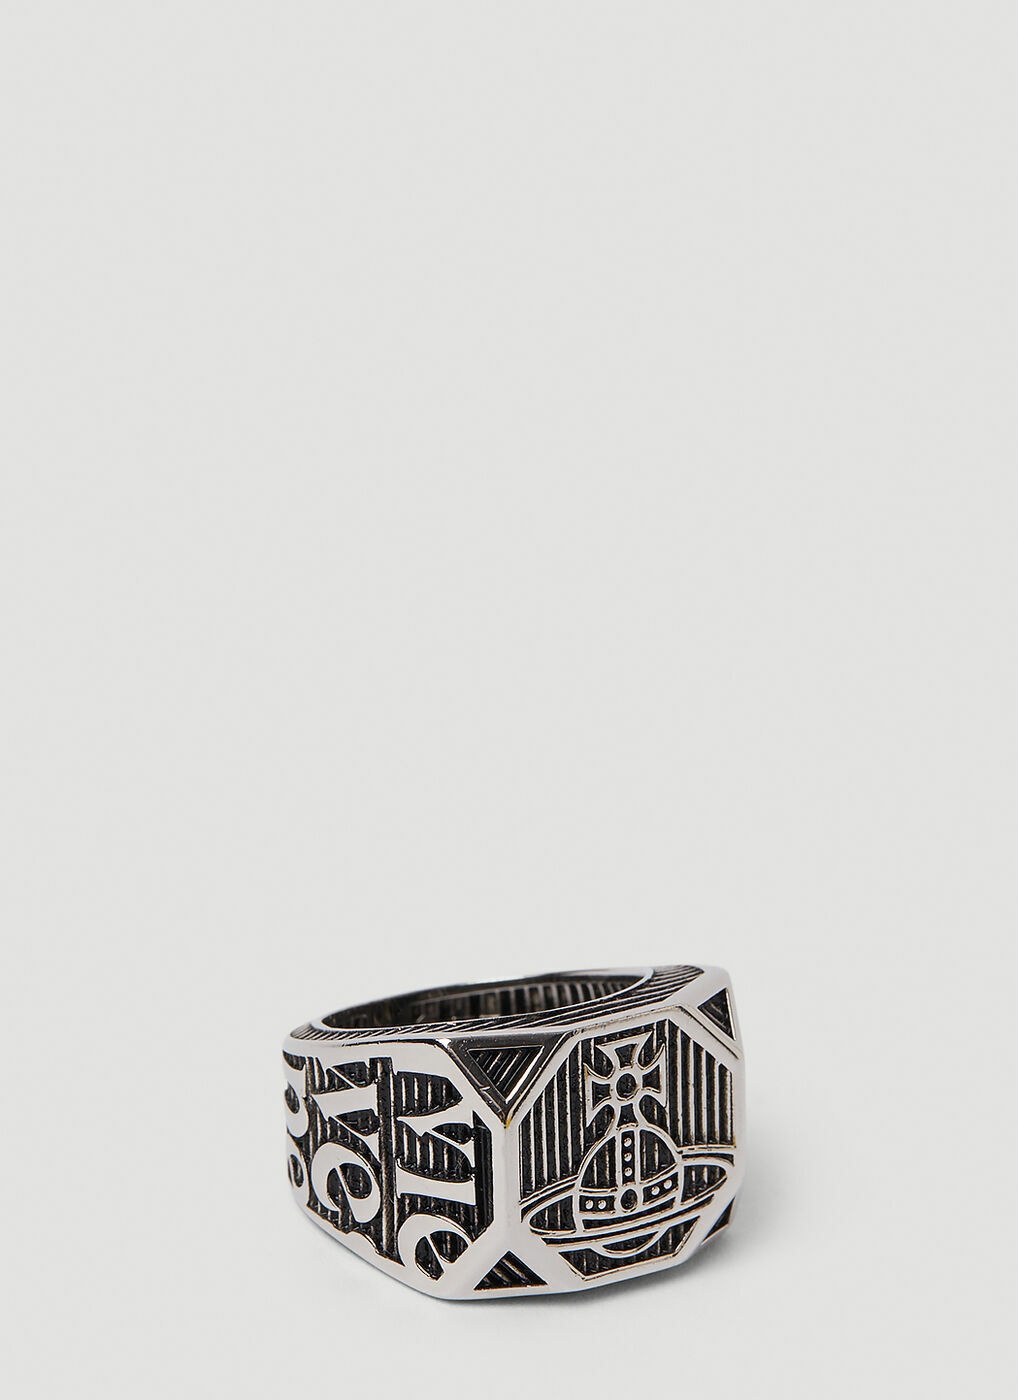 image therapy — vivienne westwood silver armored ring